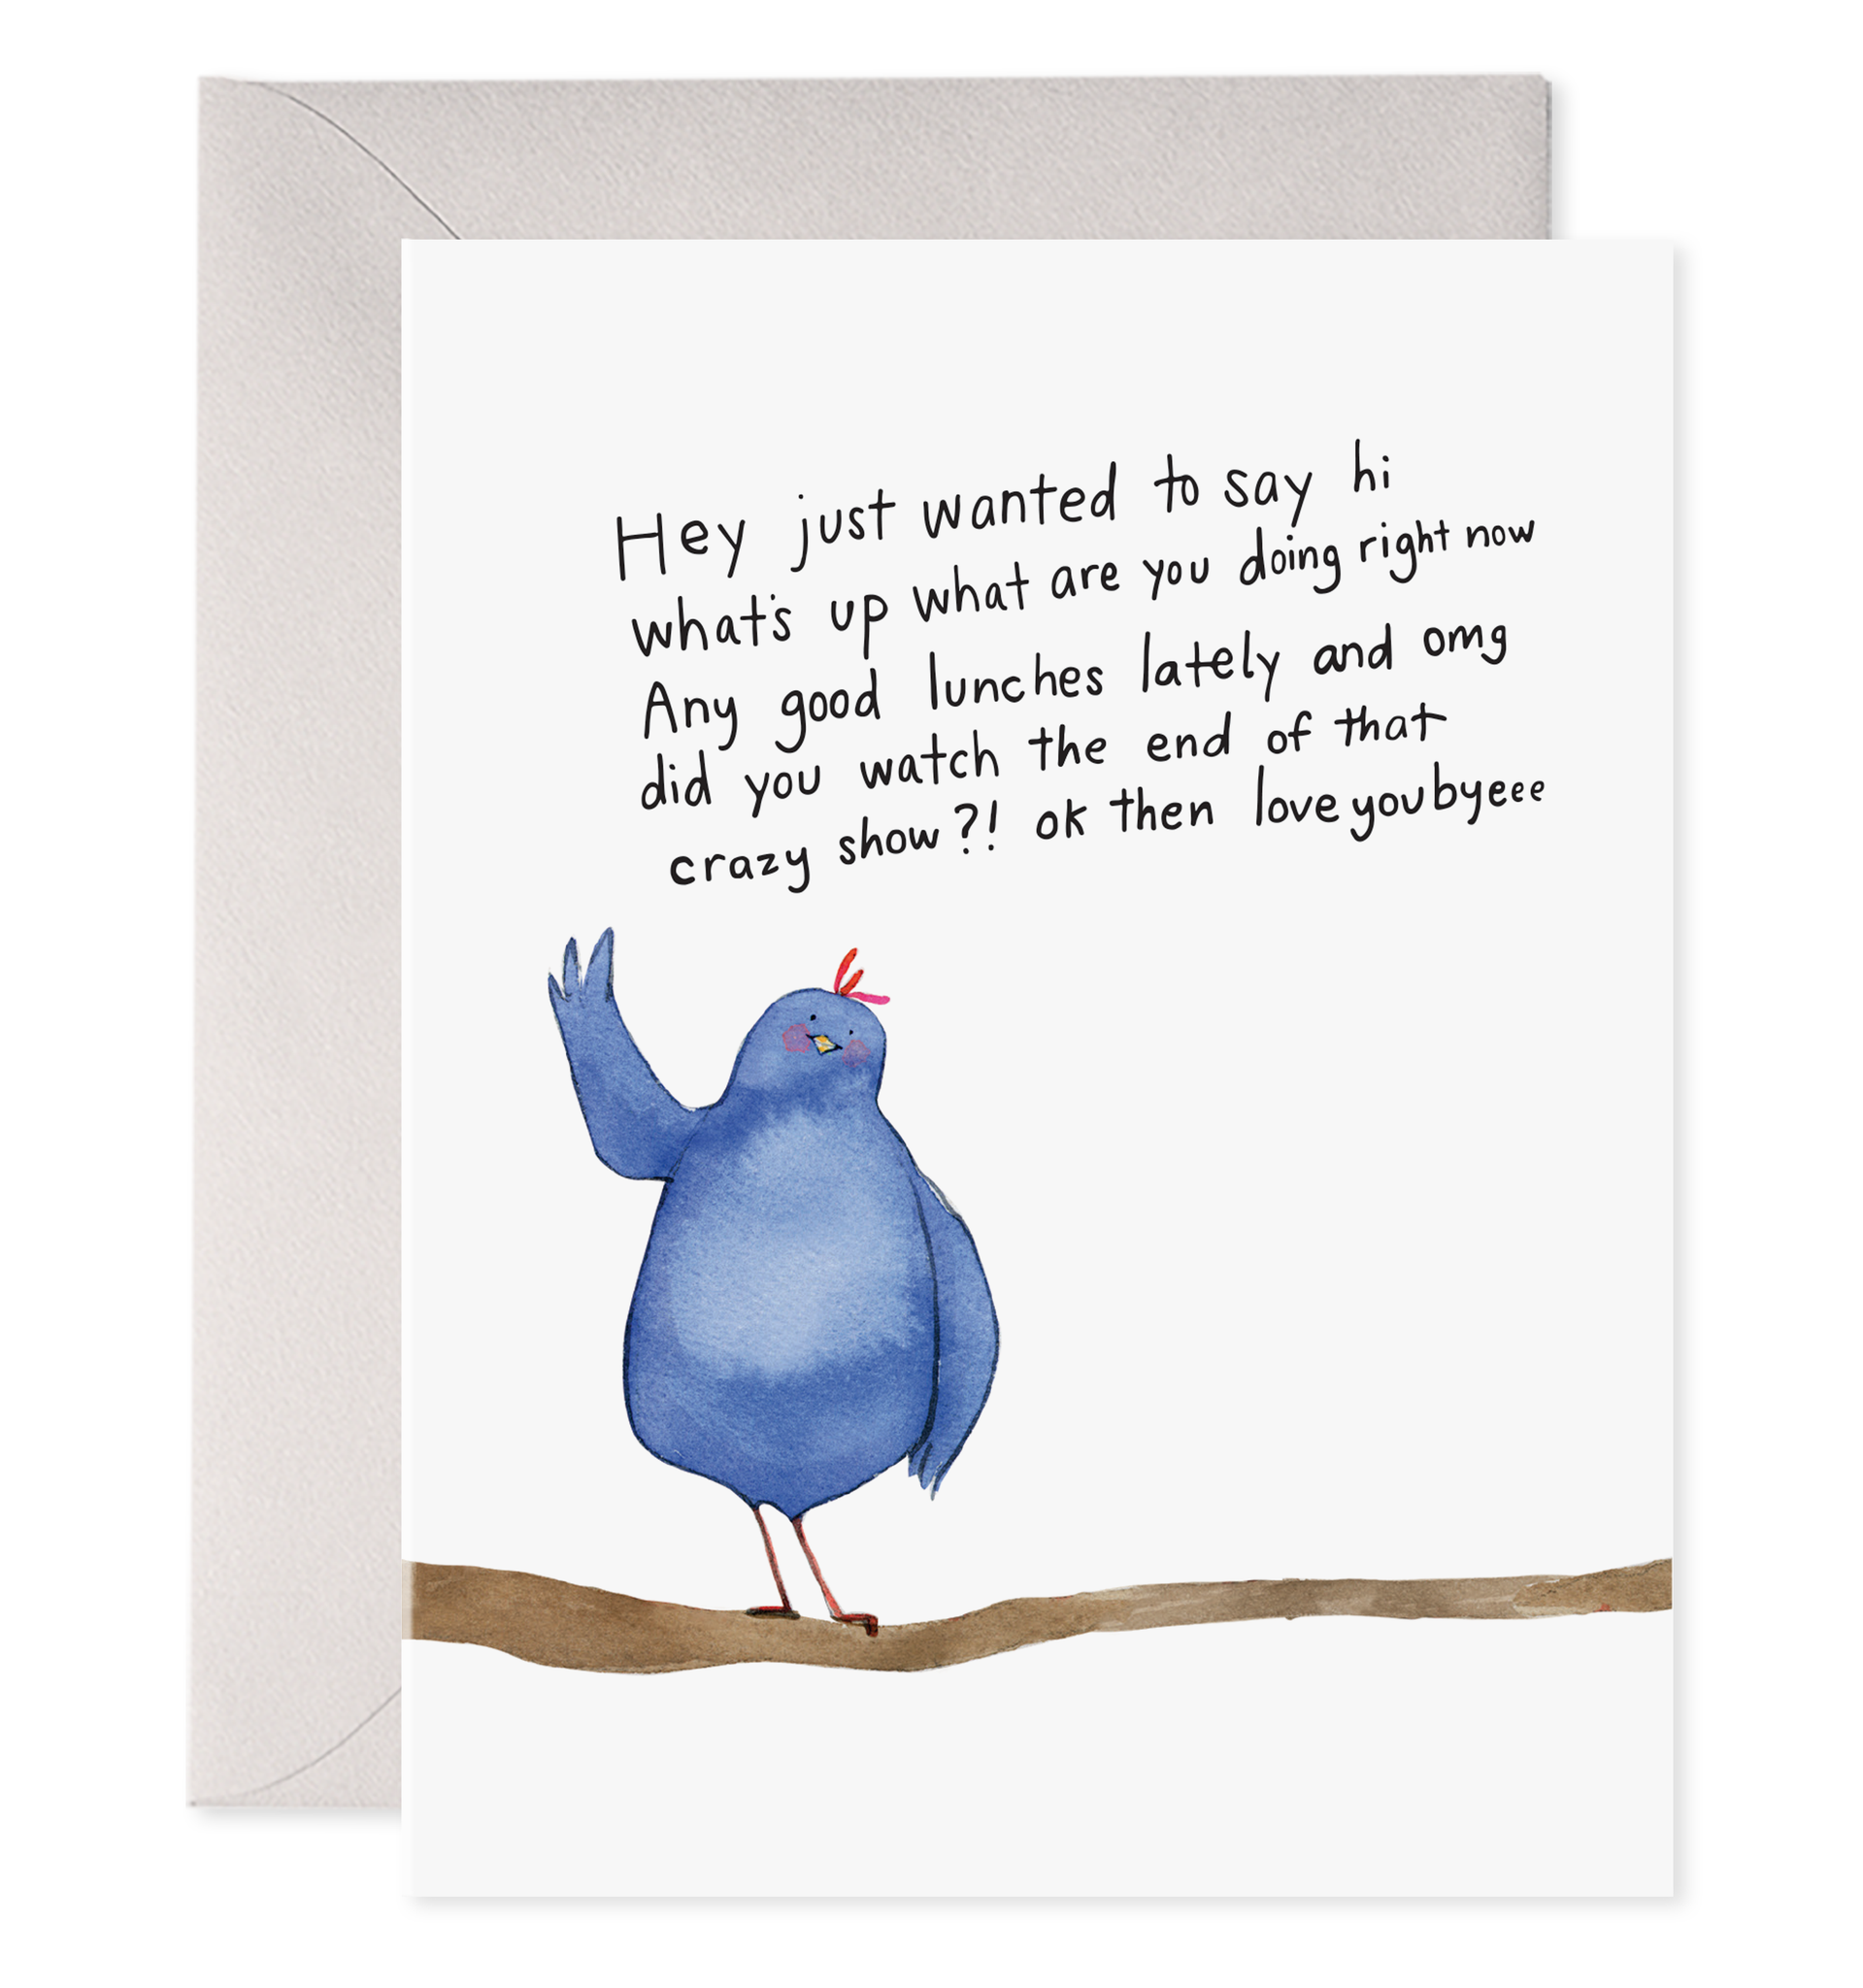 Funny Thinking of You Card, Just Because Cards for Friends, Get